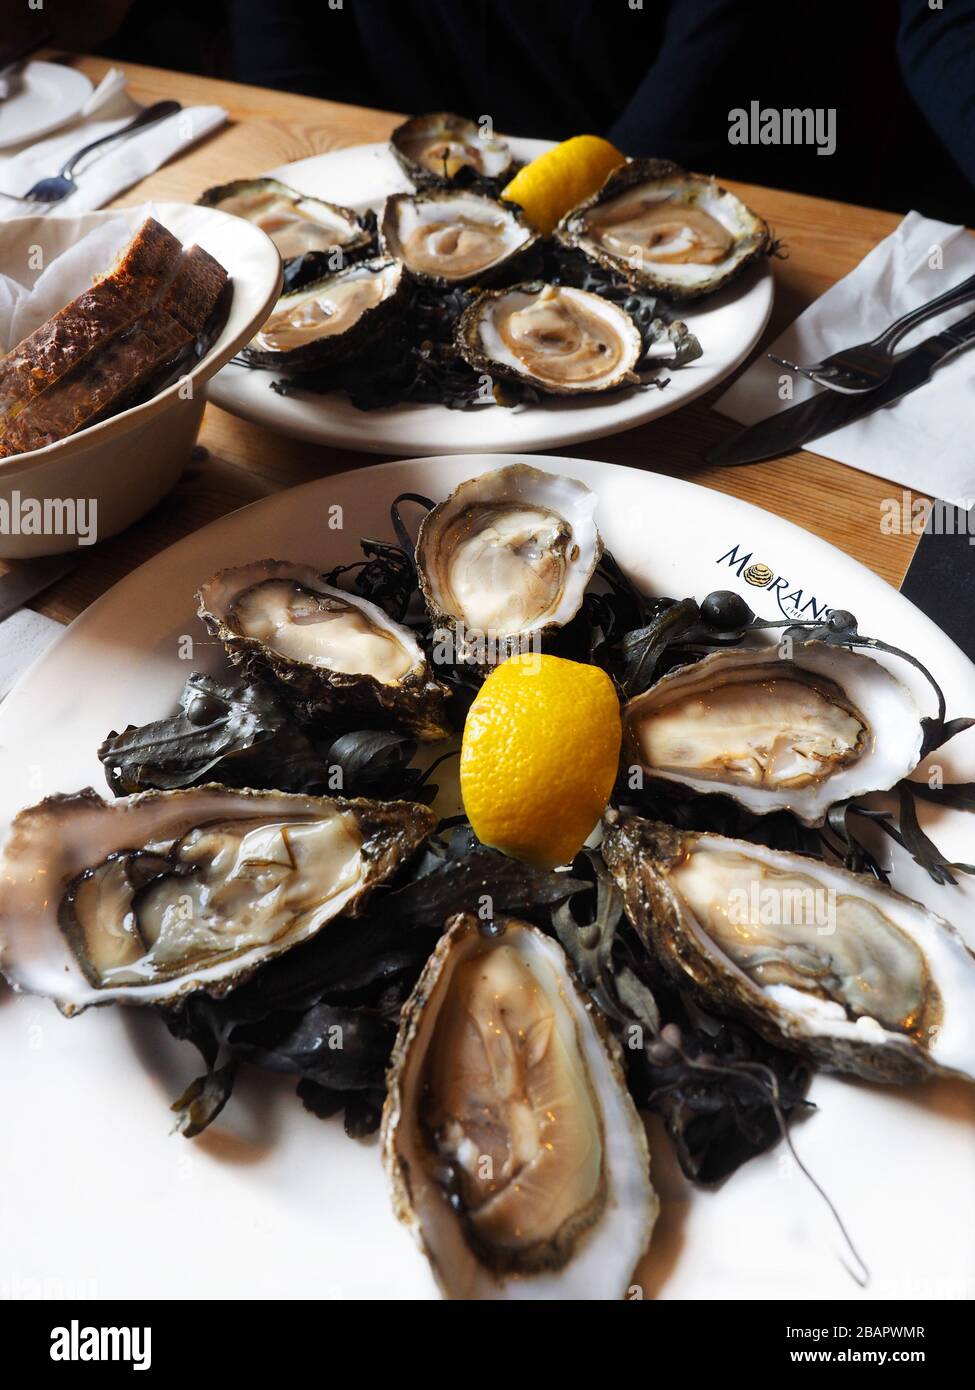 Oyster, Morans of the Weir, world famous oyster cottage, restaurant, Roymore, Kilcolgan, Galway, Republic of Ireland Stock Photo